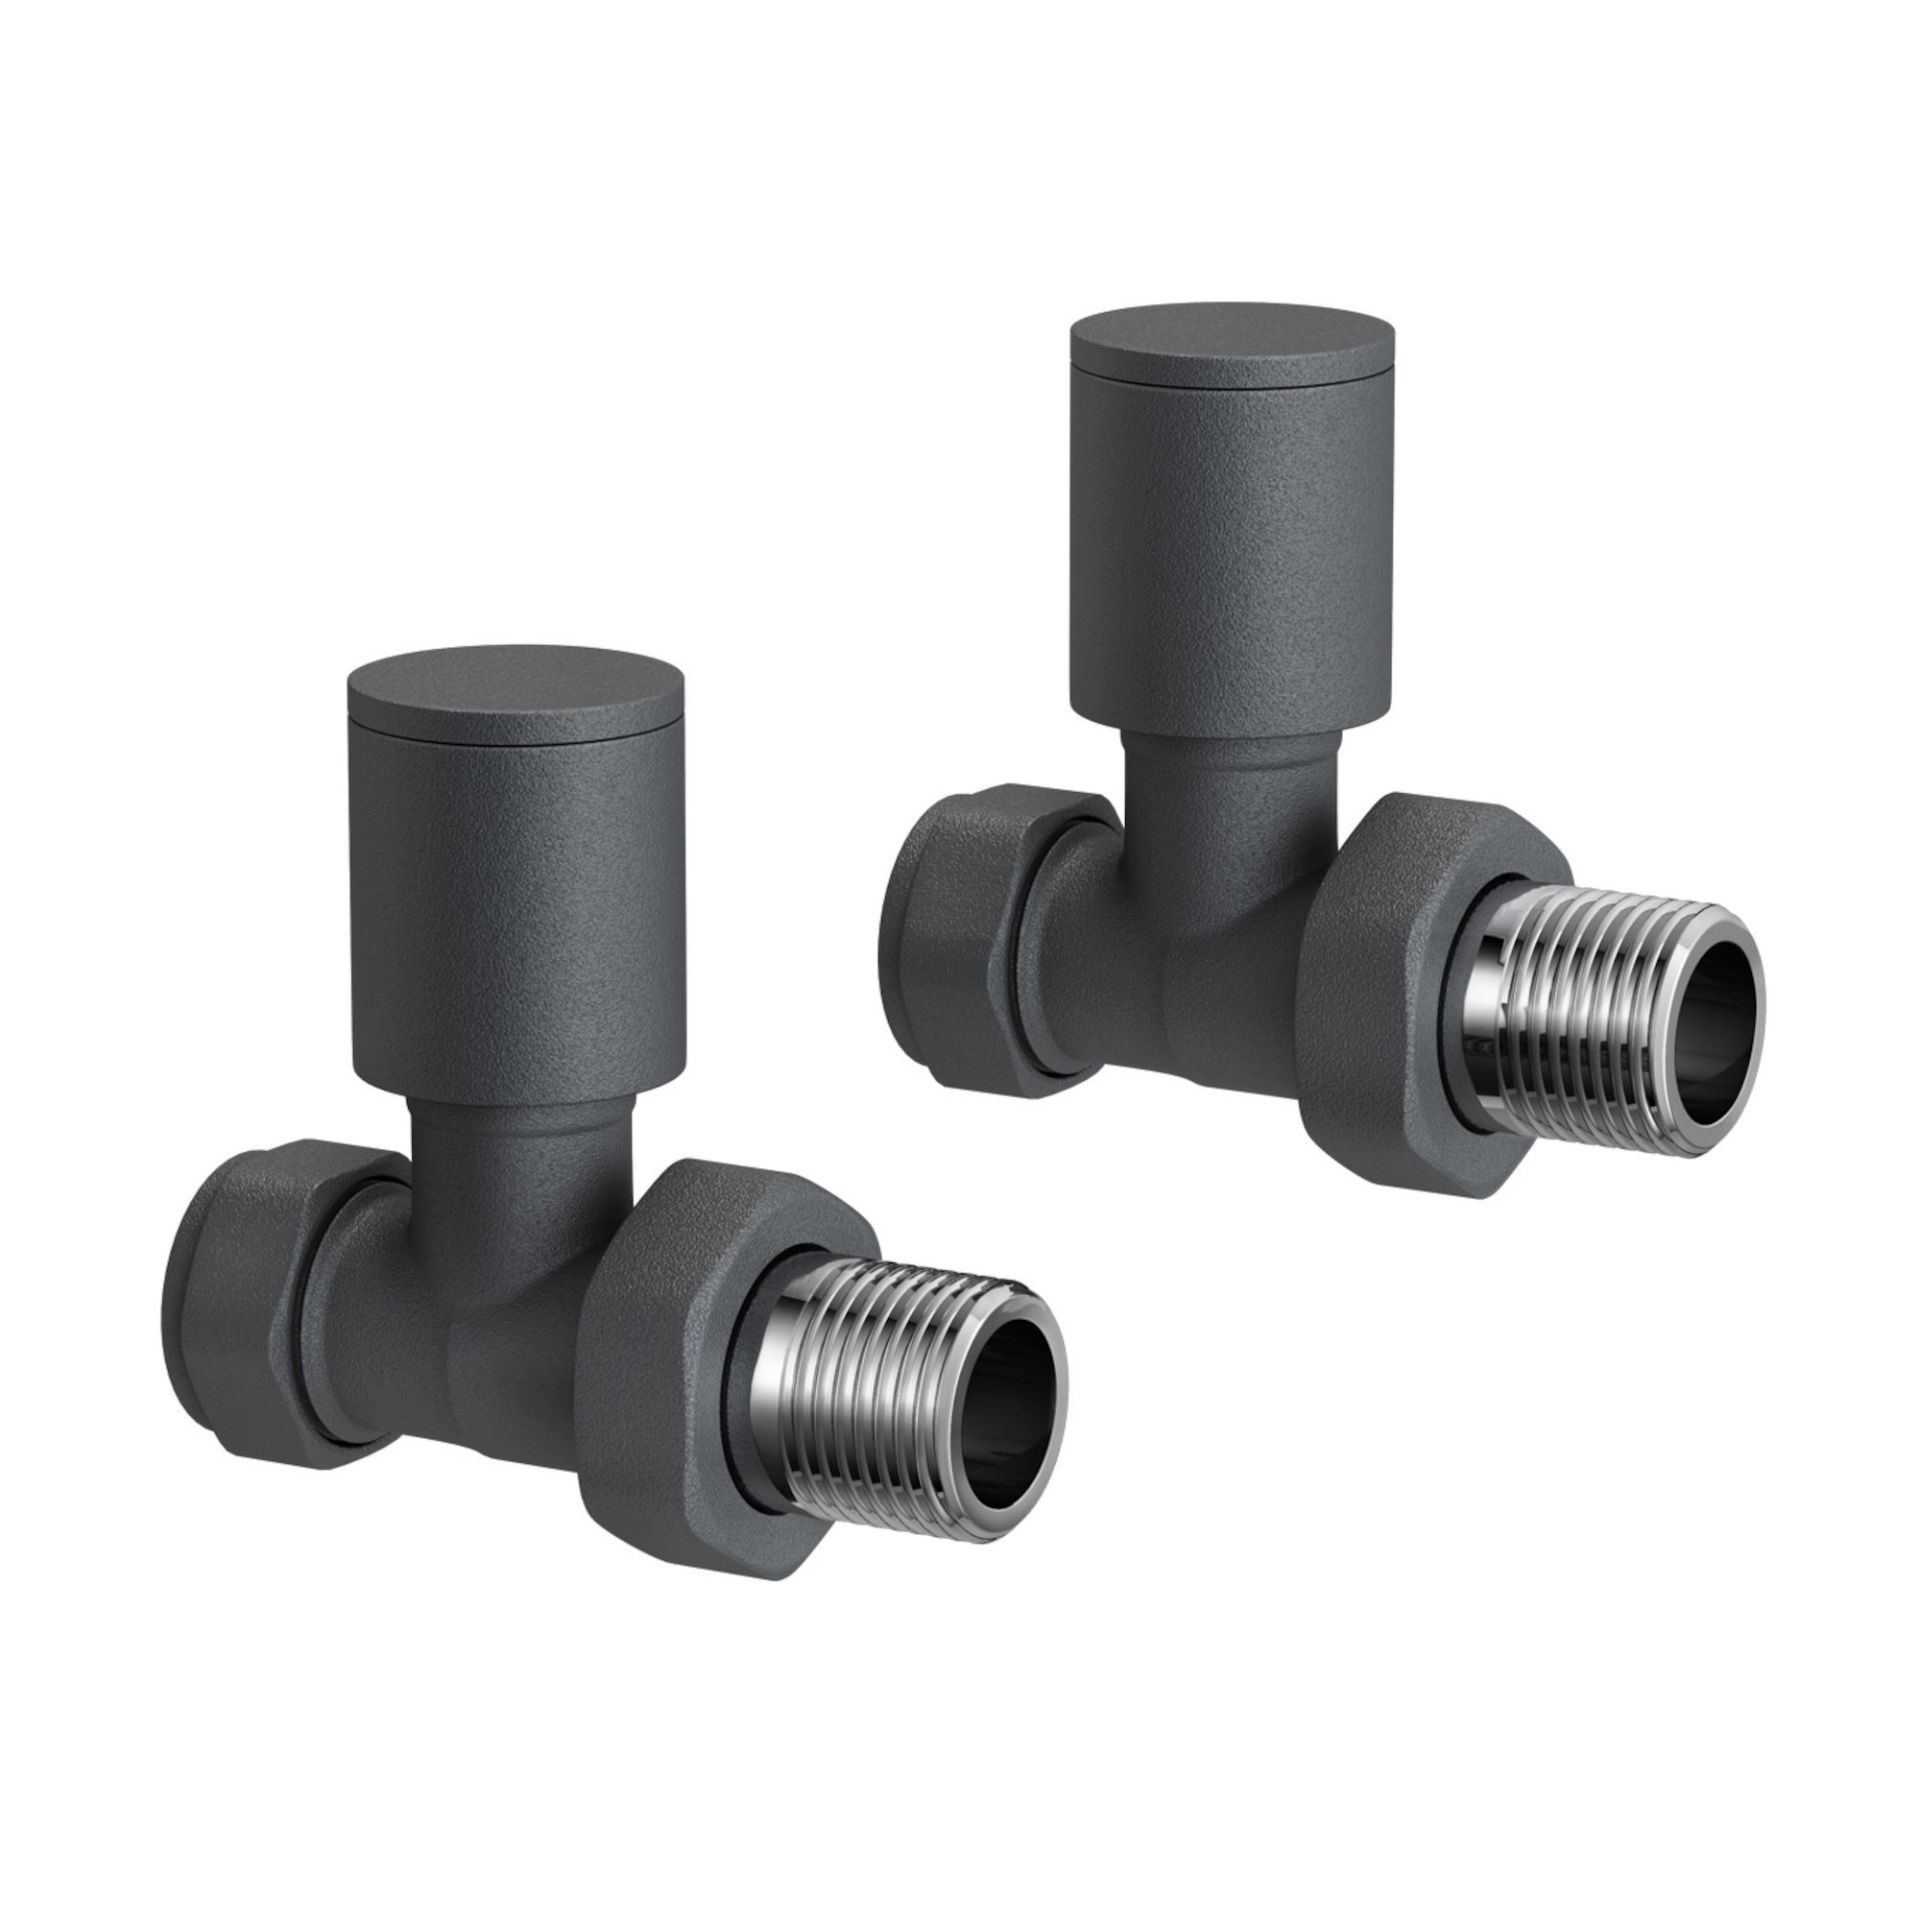 (AA1007) Anthracite Standard Connection Straight Radiator Valves 15mm Contemporary anthracite ... - Image 2 of 2